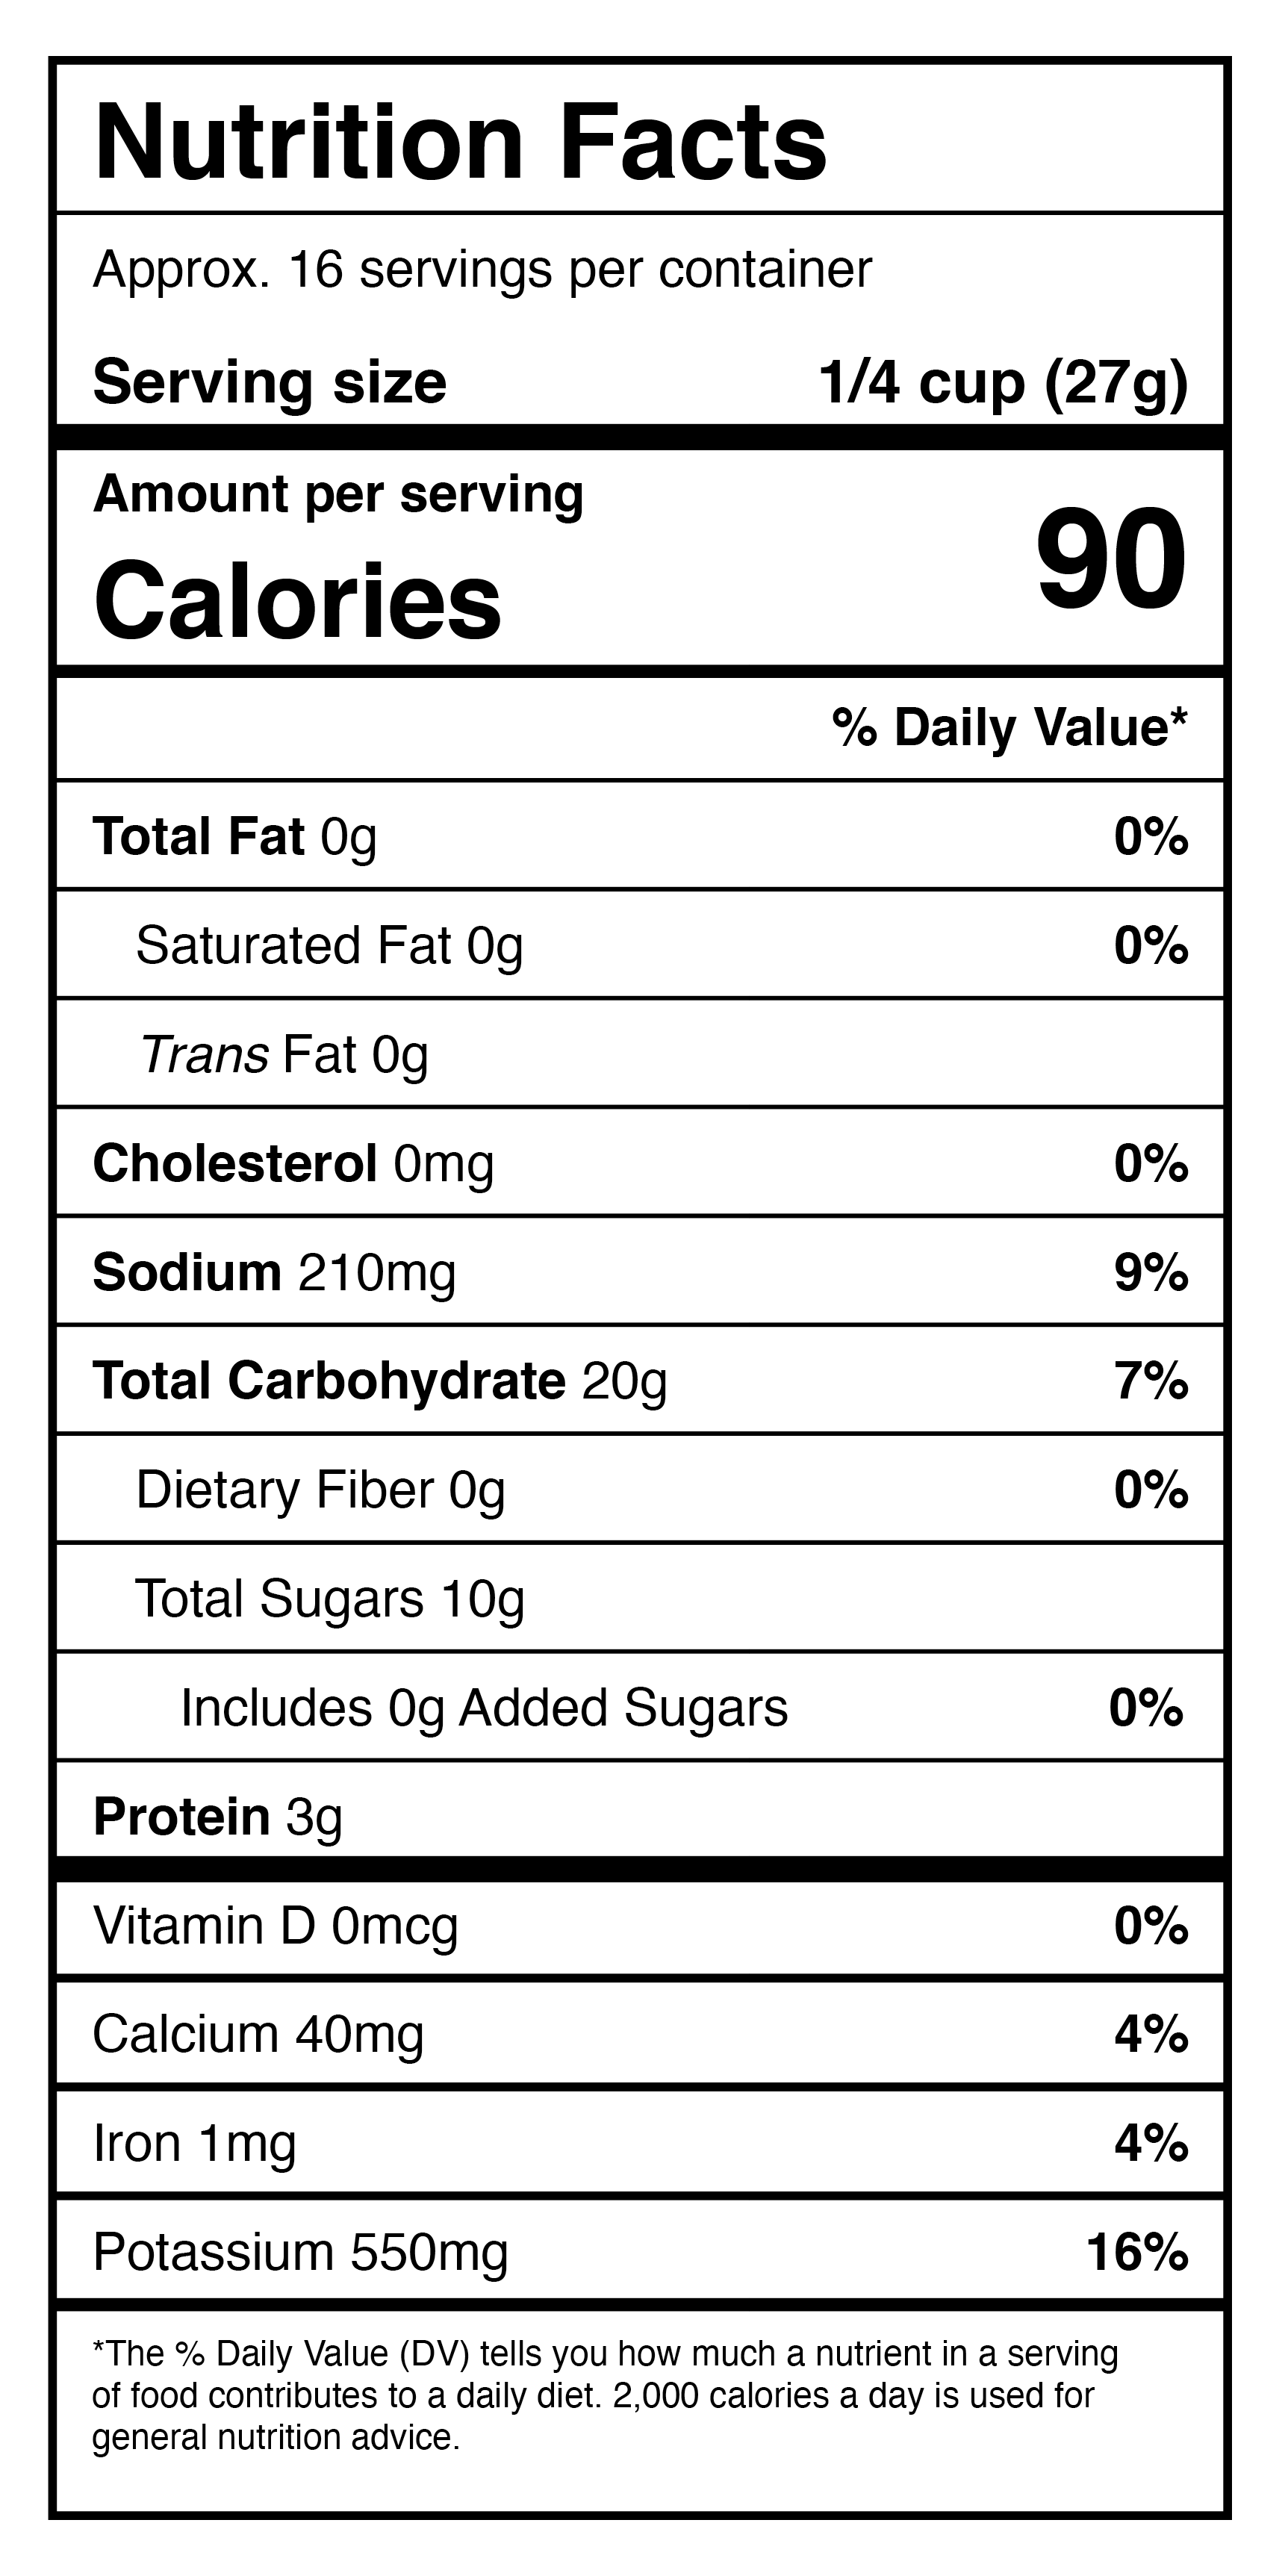 A nutrition label showing the nutrition facts of Harmony House Organic Dried Red Beet Dices (16.5 oz).